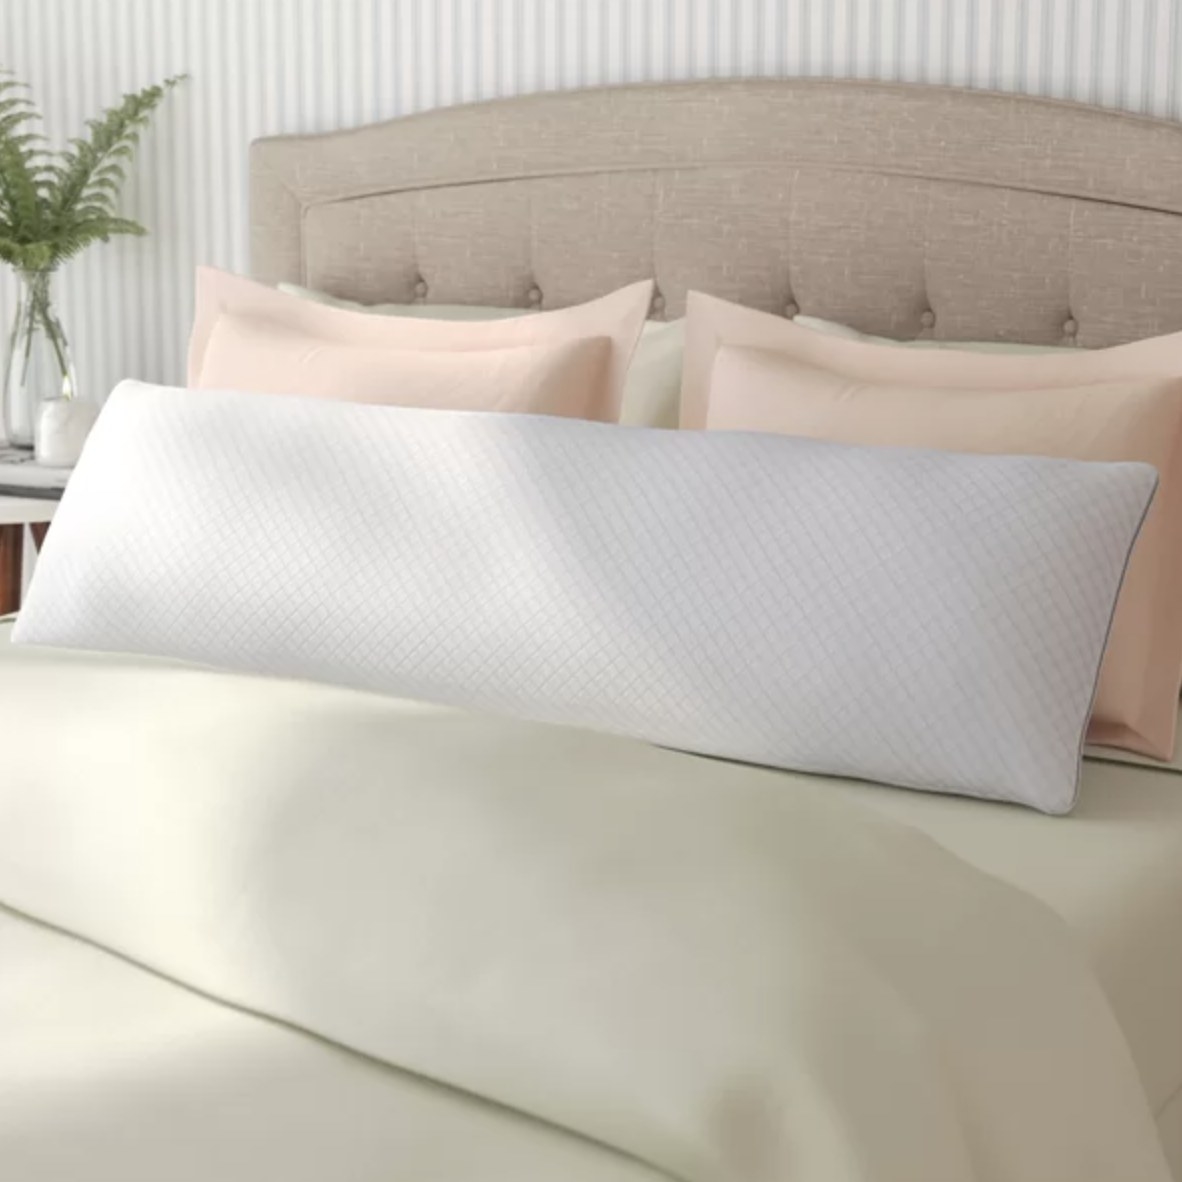 The white, cool body pillow is against a neutral bed